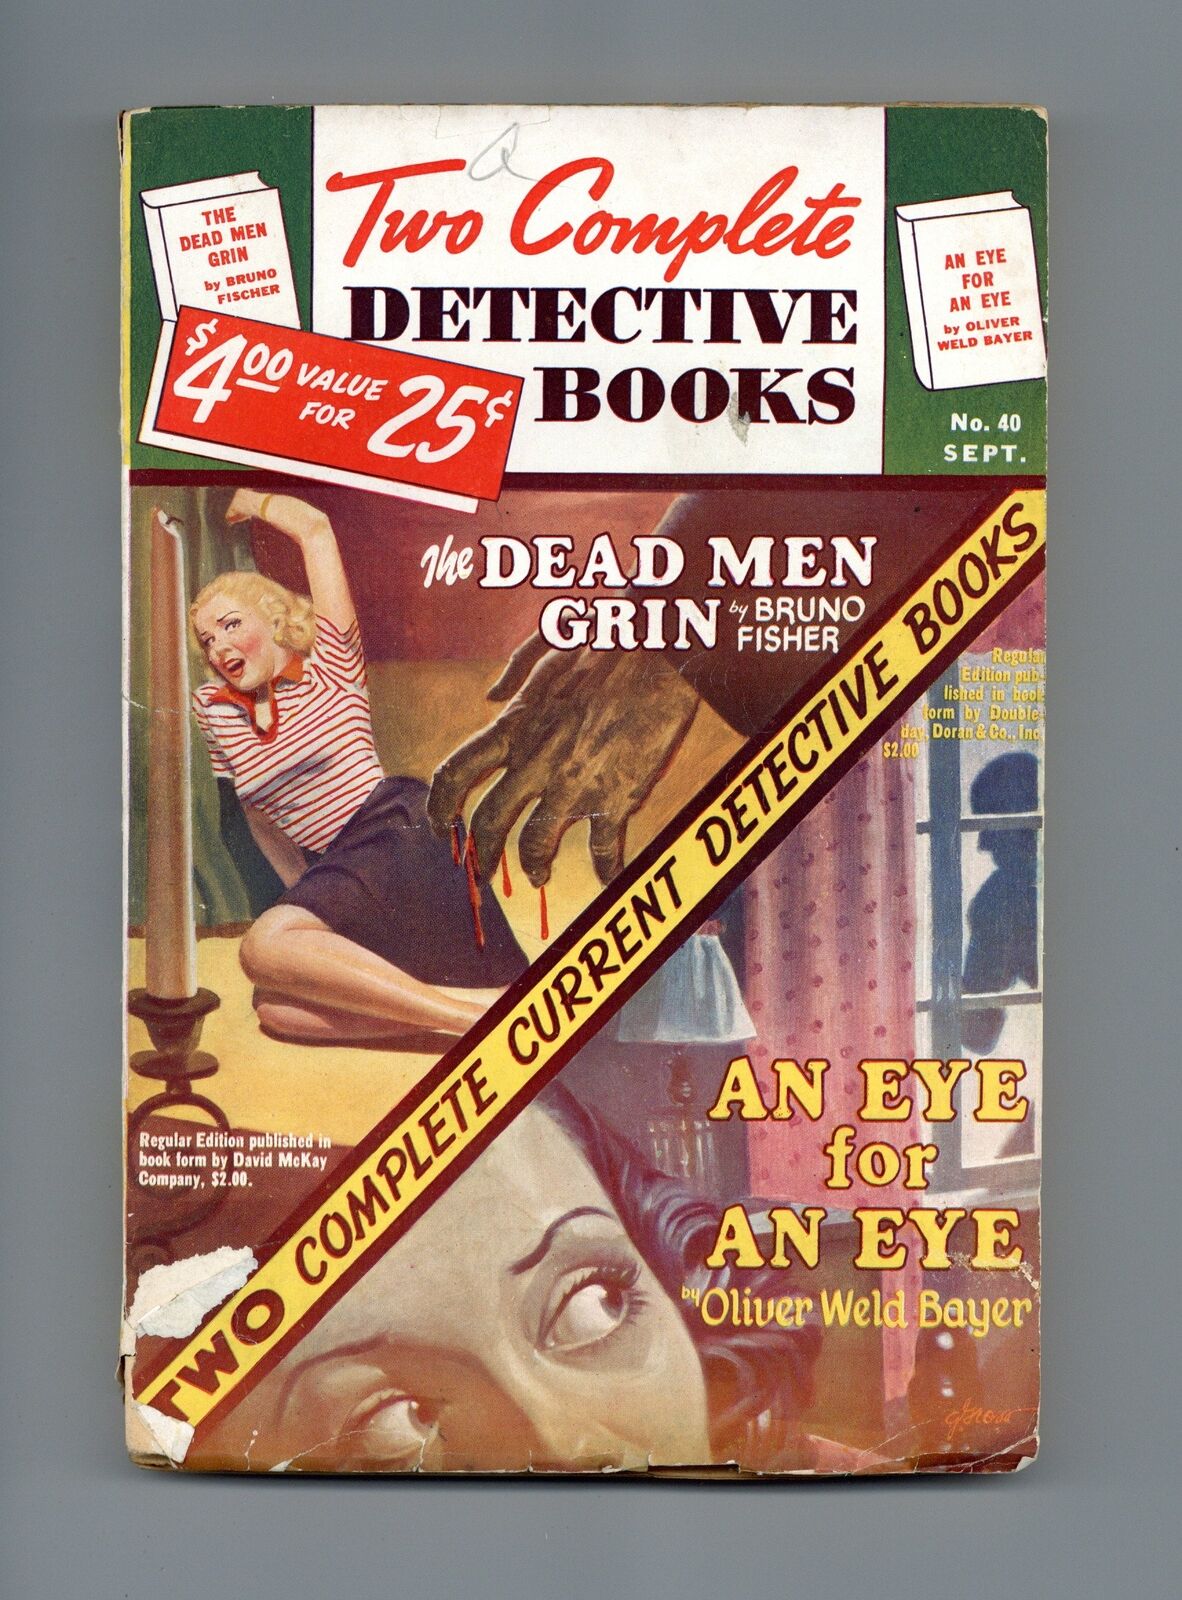 Two Complete Detective Books Pulp Sep 1946 #40 VG